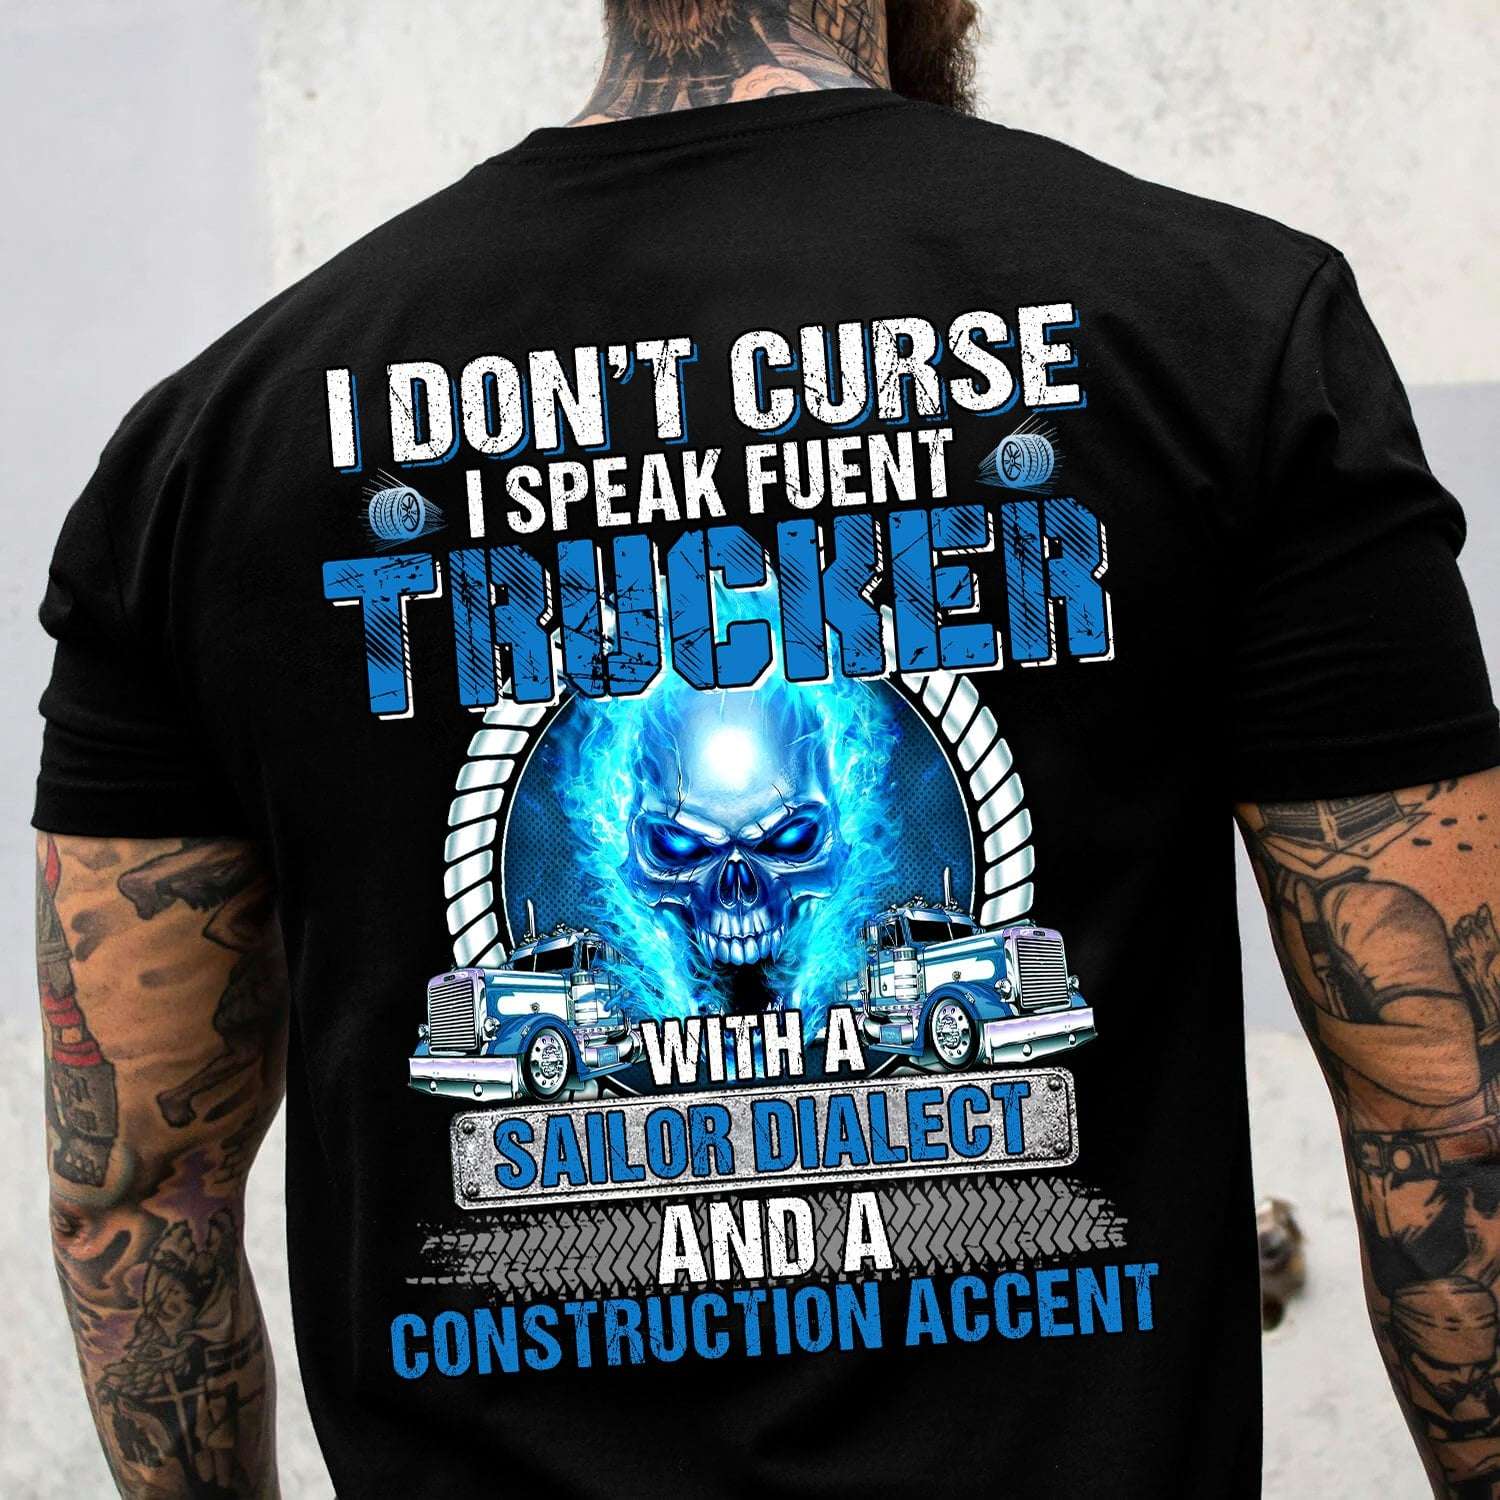 Skull Truck - I don't curse i speak fuent trucker with a sailor dialect